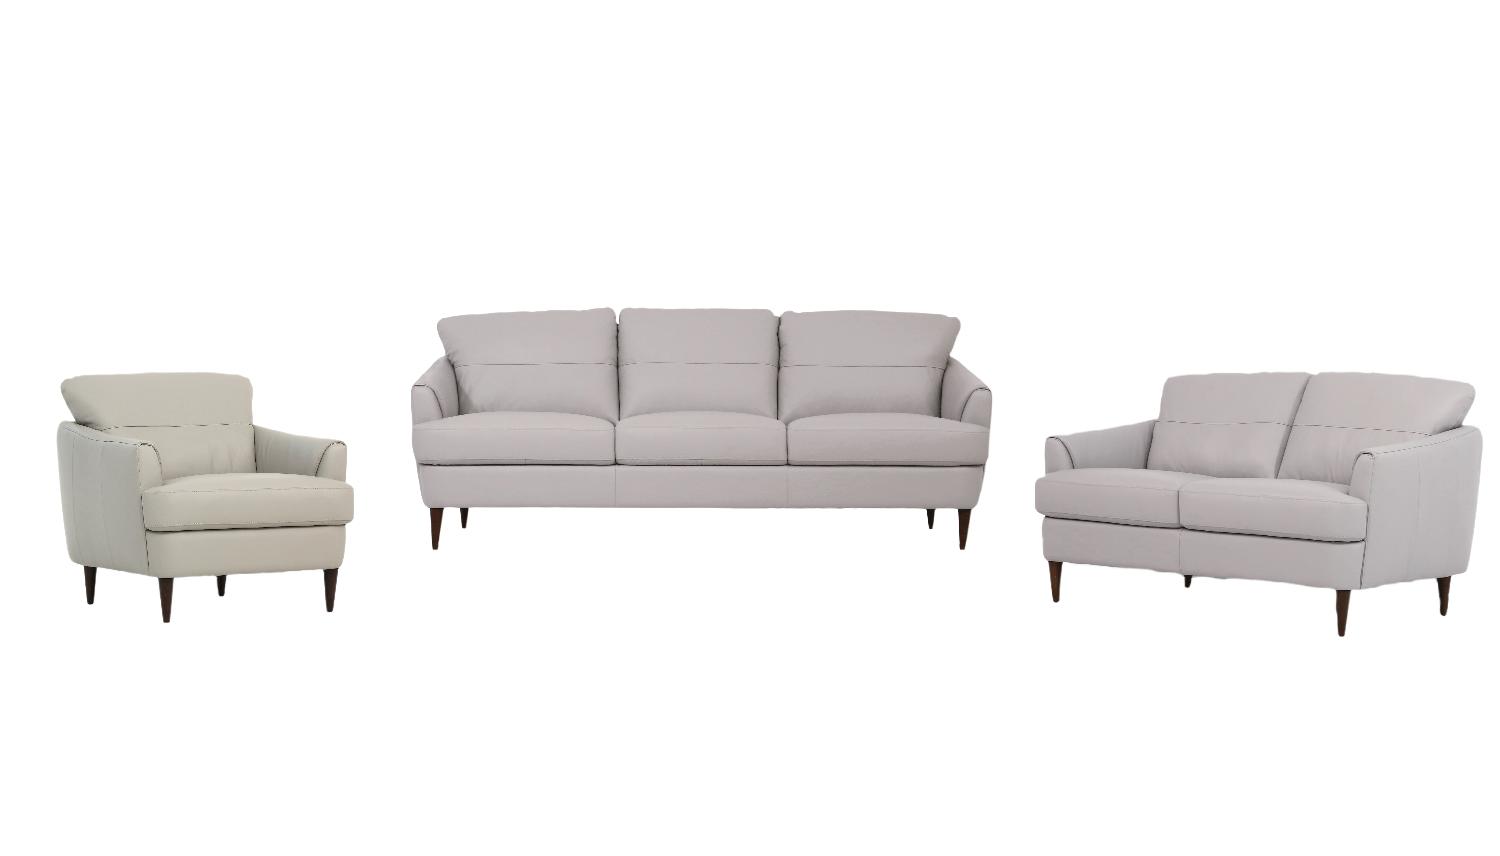 

    
Contemporary Pearl Gray Leather Sofa + Loveseat + Chair by Acme Helena 54575-3pcs
